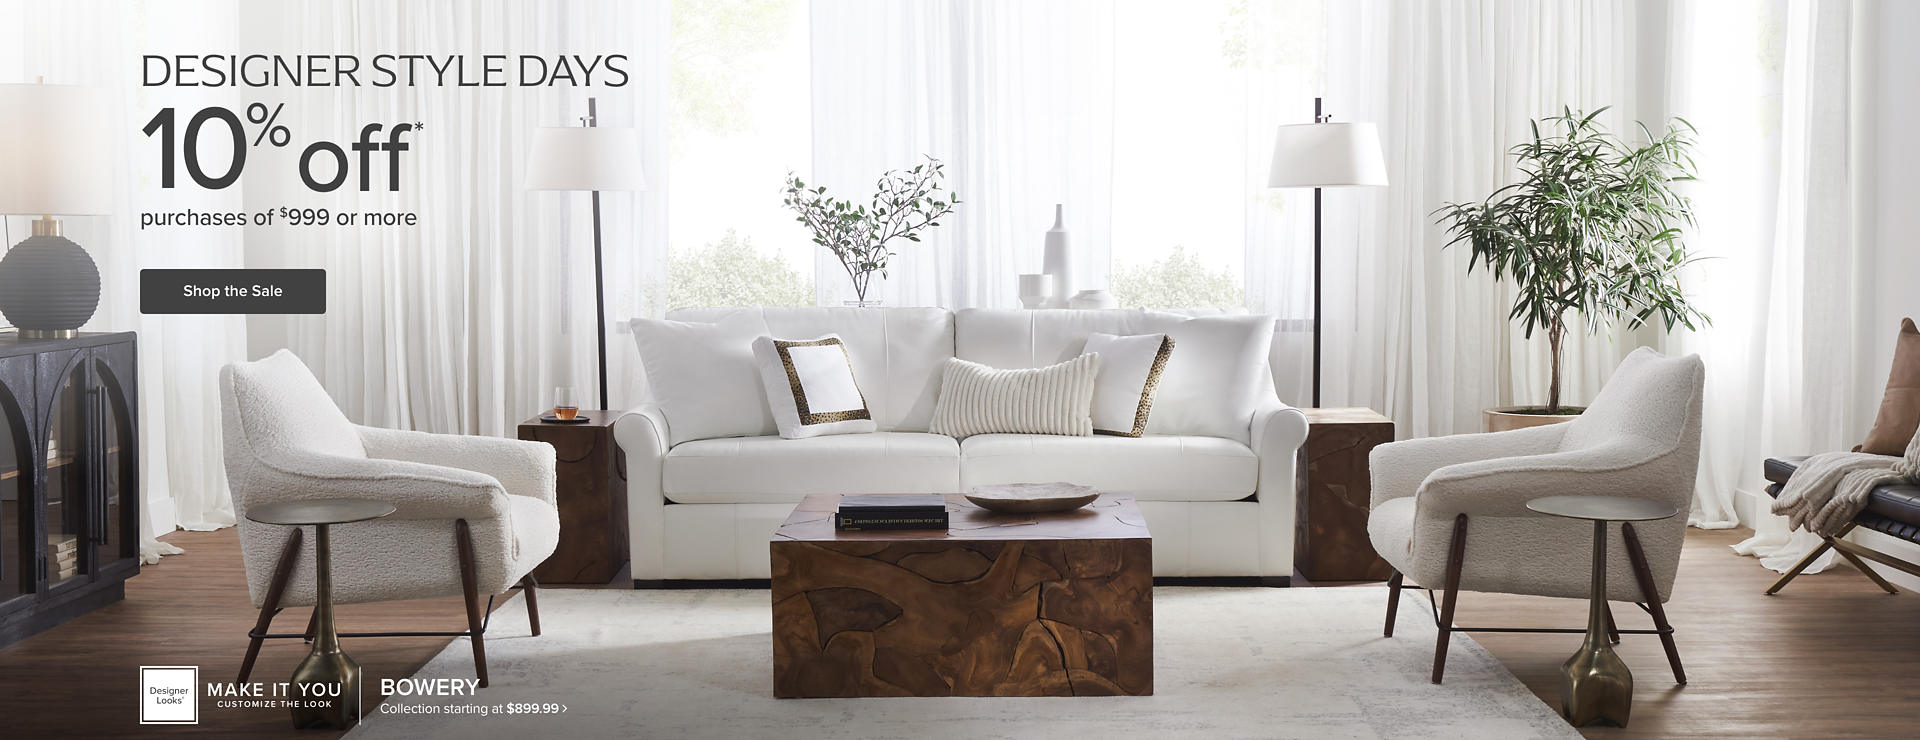 Bowery Collection Starting at $899.99